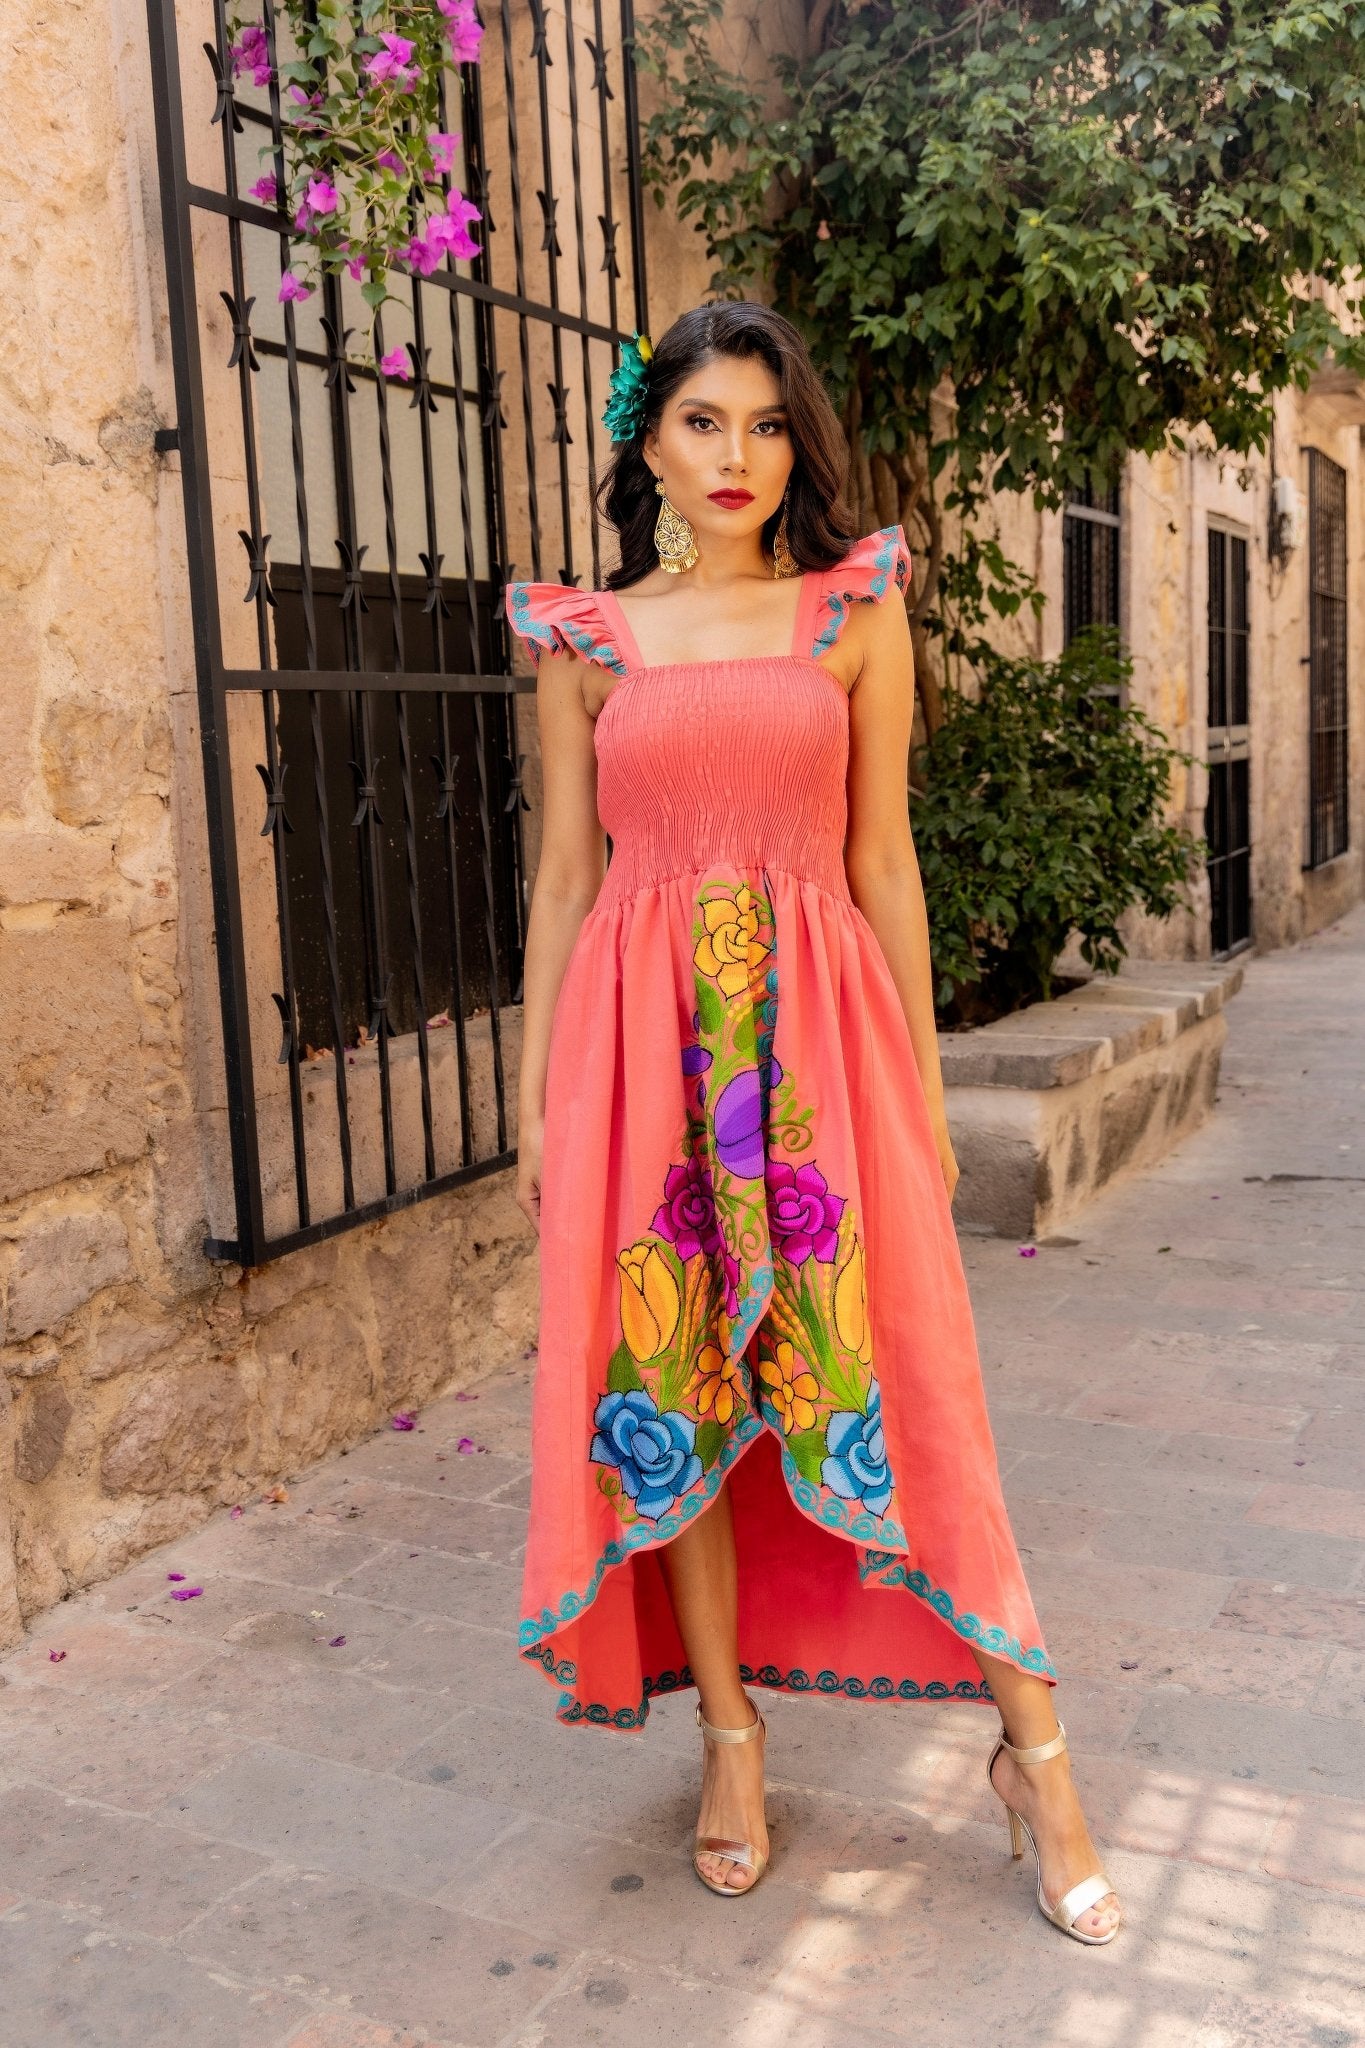 Floral Embroidered High-Low Mexican Dress in Coral with multicolor embroidery